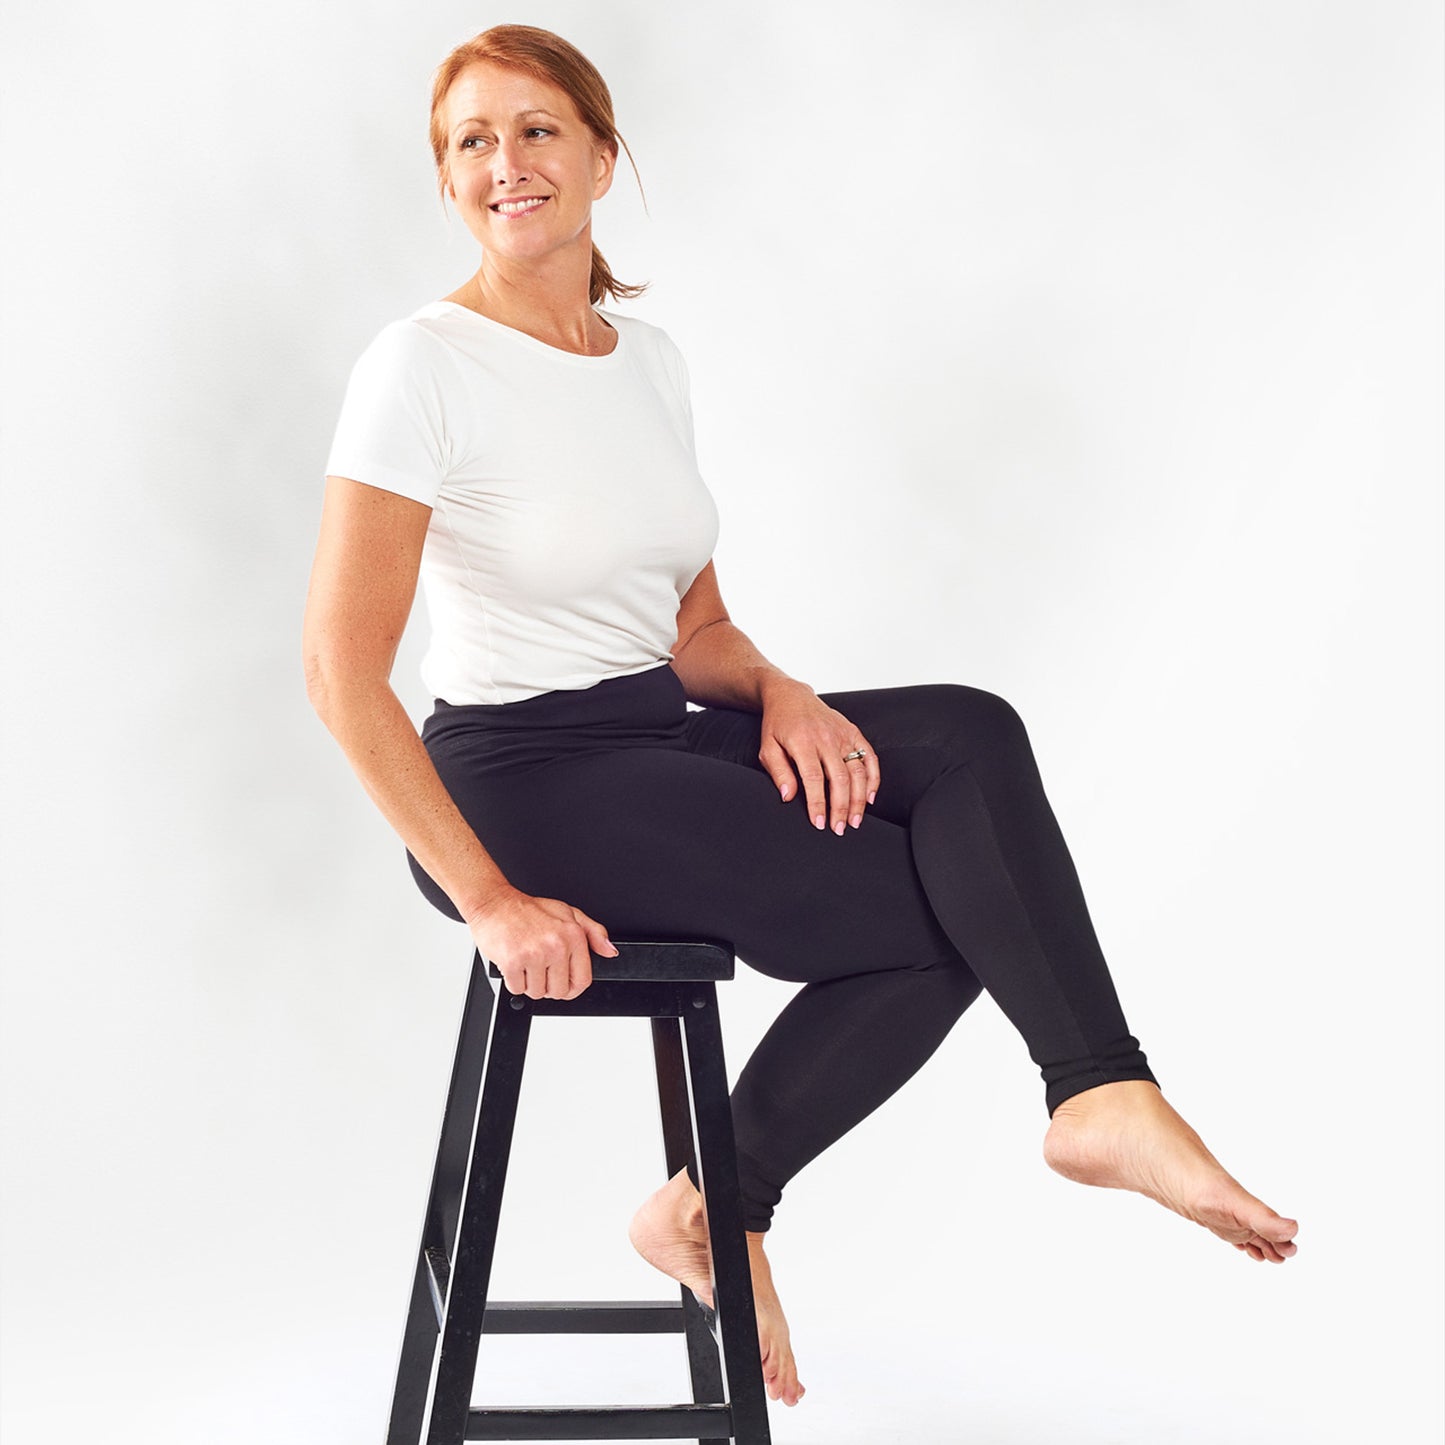 Organic Cotton - Ribbed Ankle Leggings